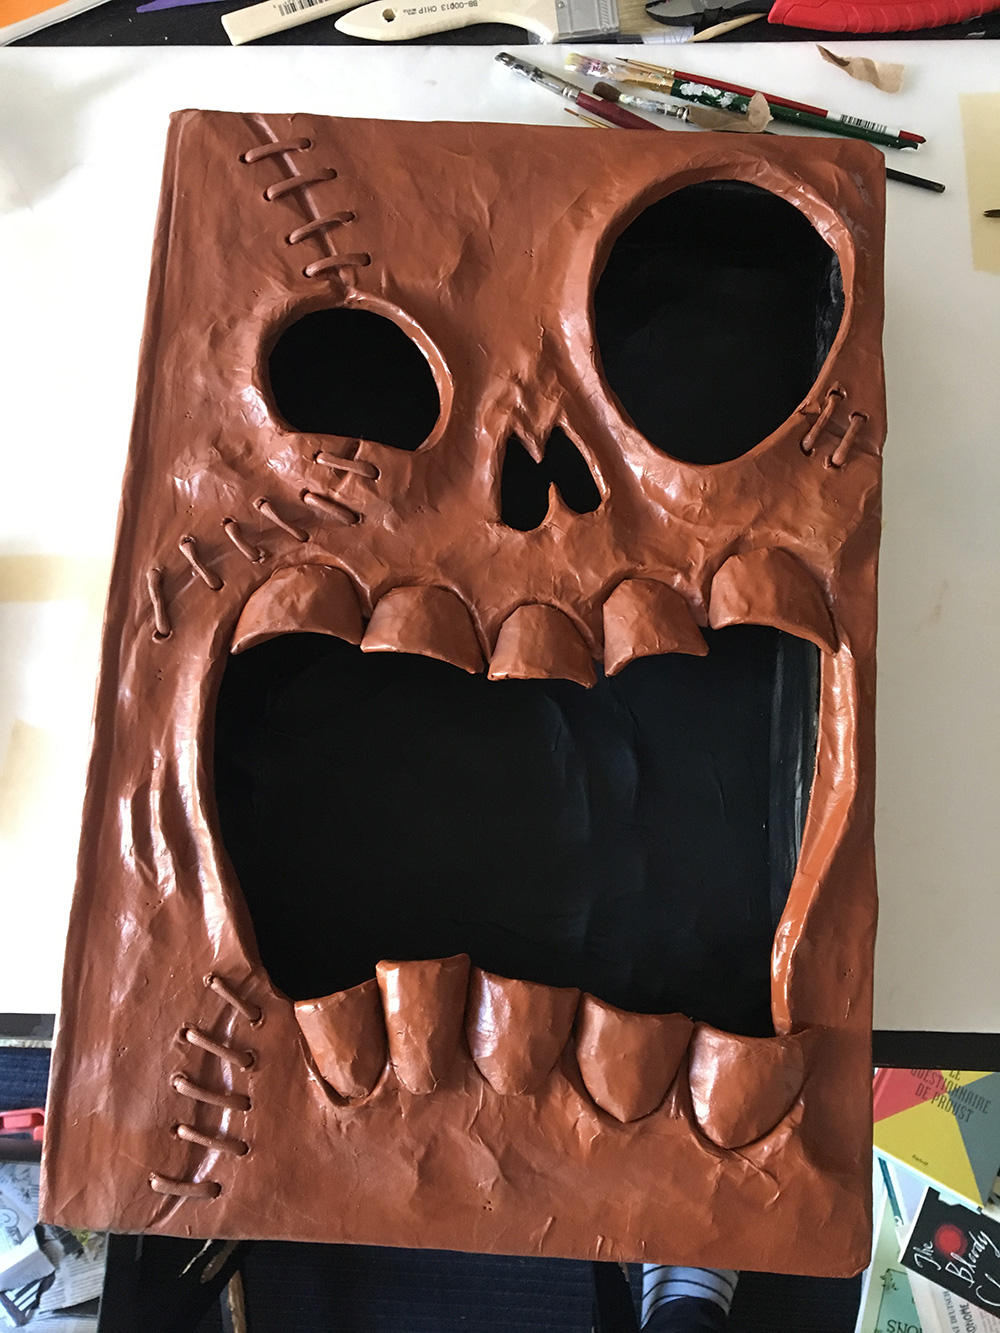 Haunted book sculpture - spray paint background color